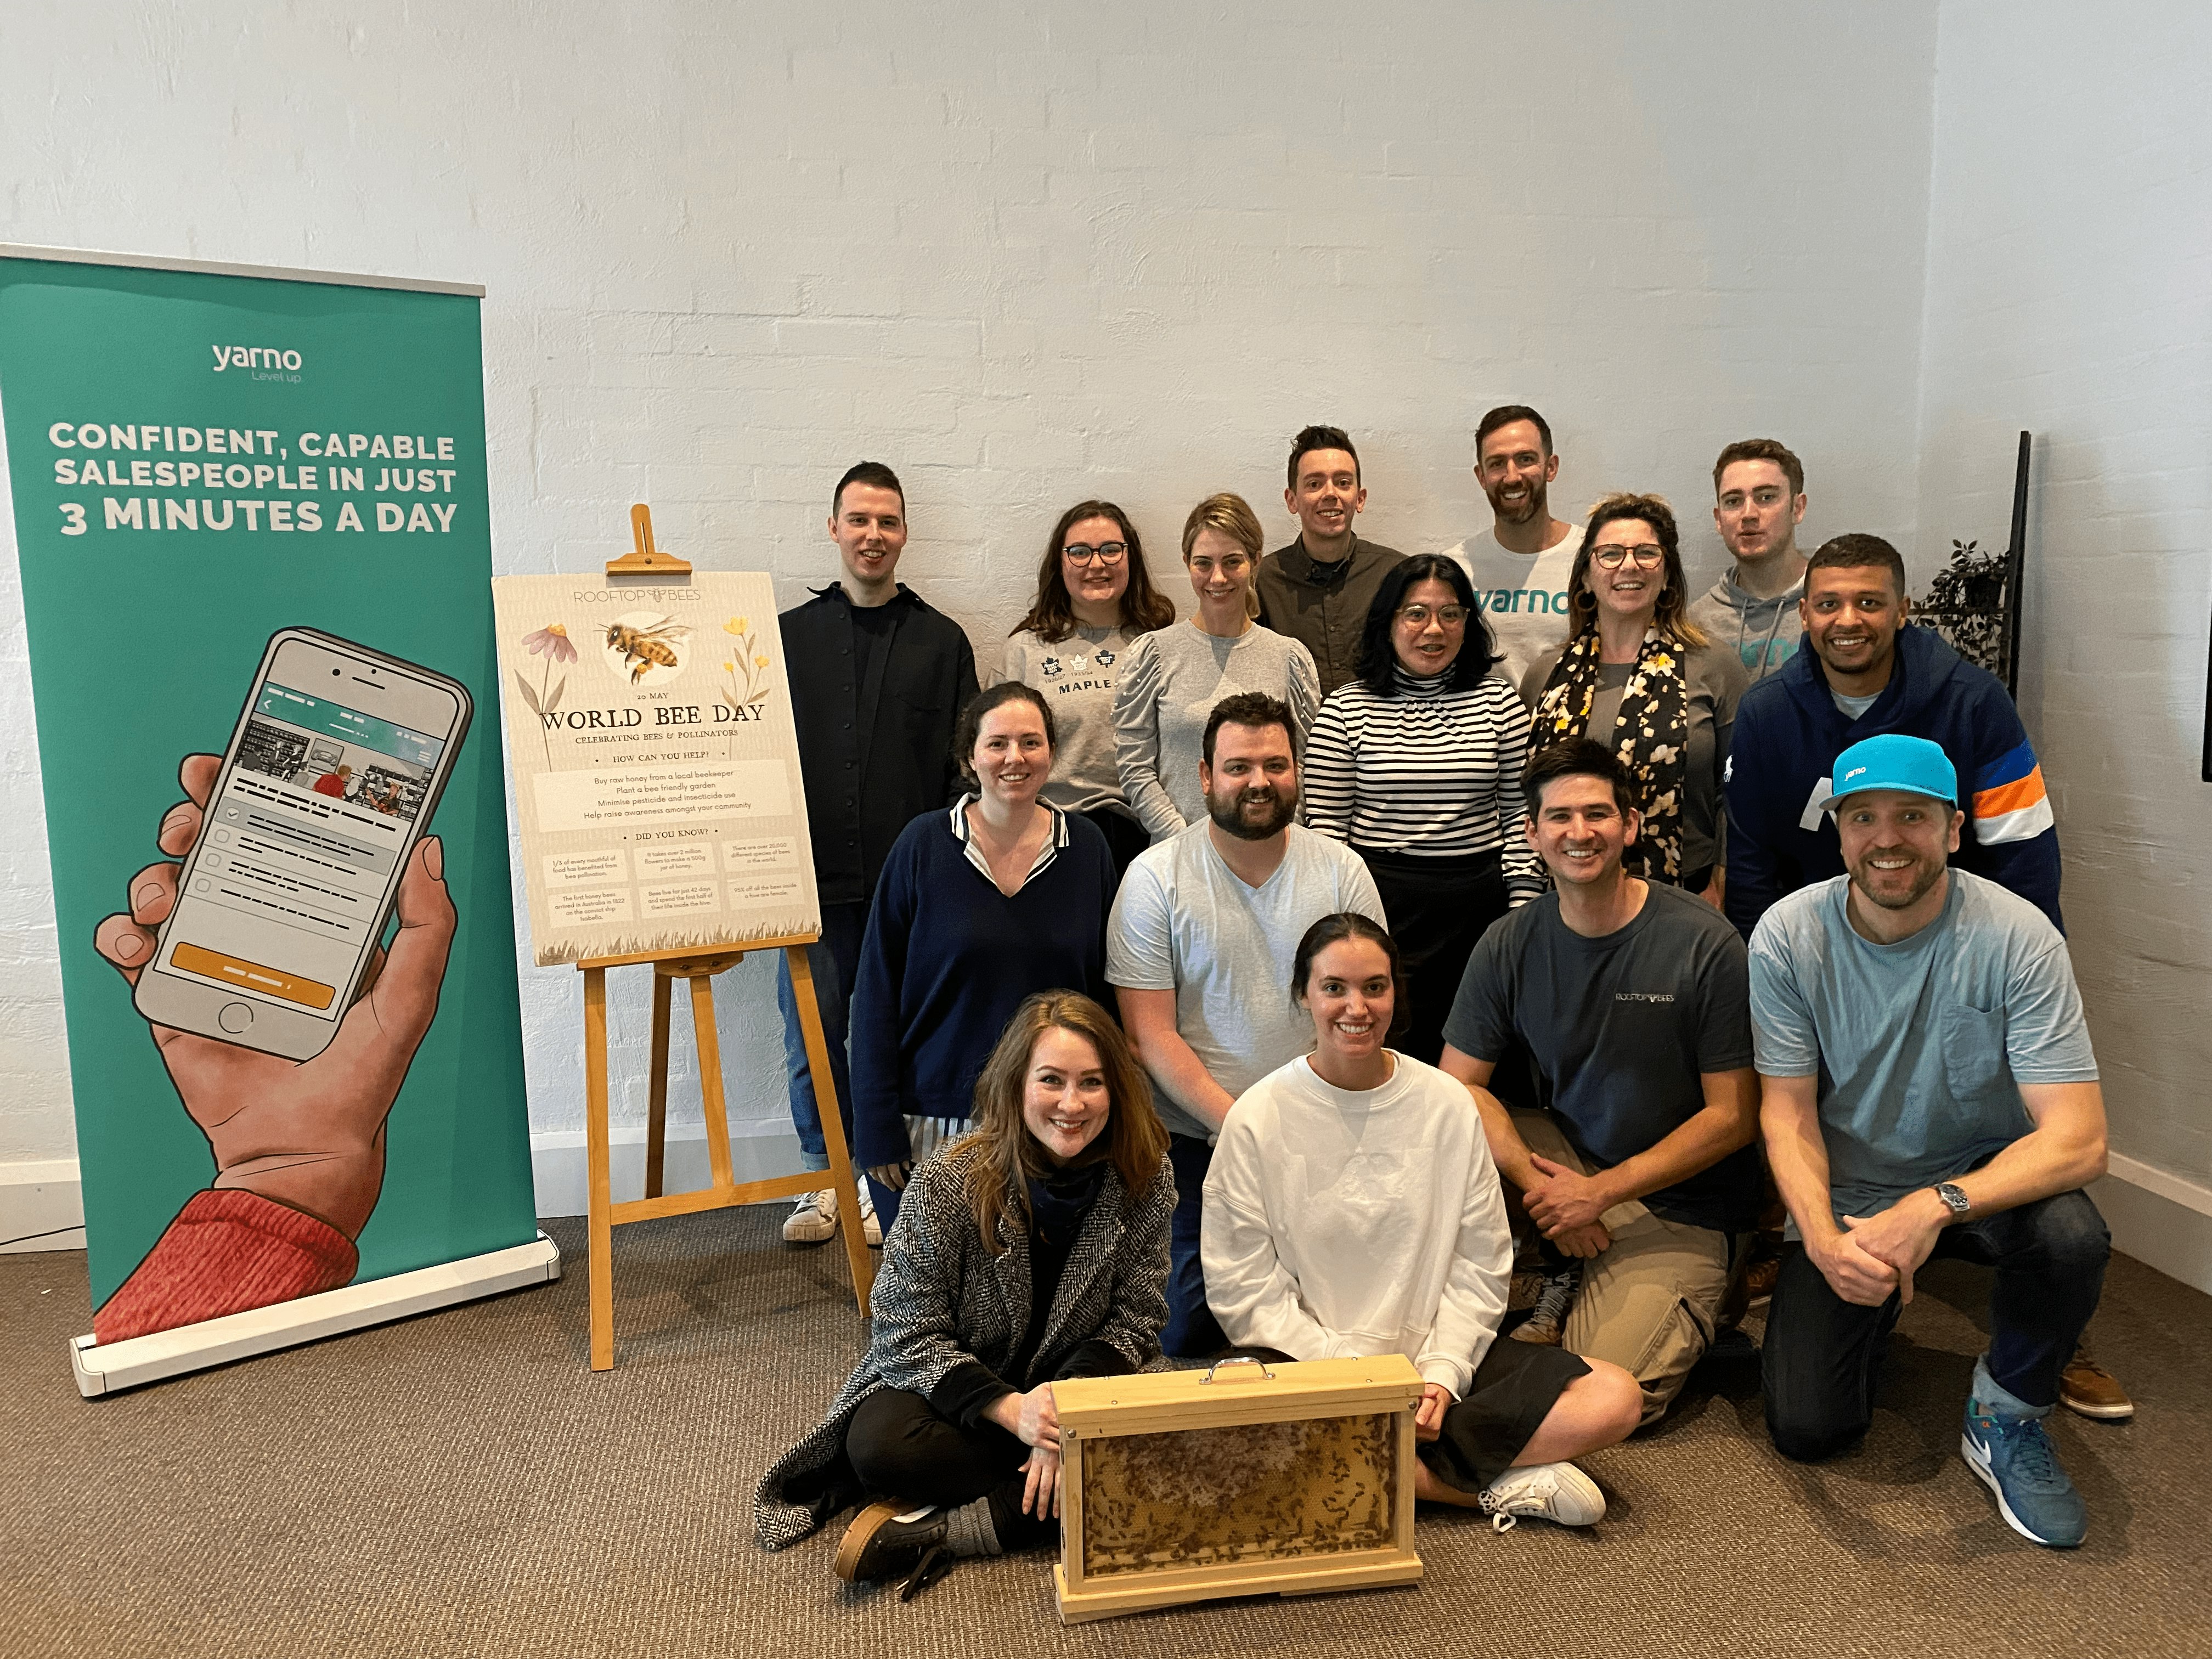 The Yarno team with Rooftop Bees